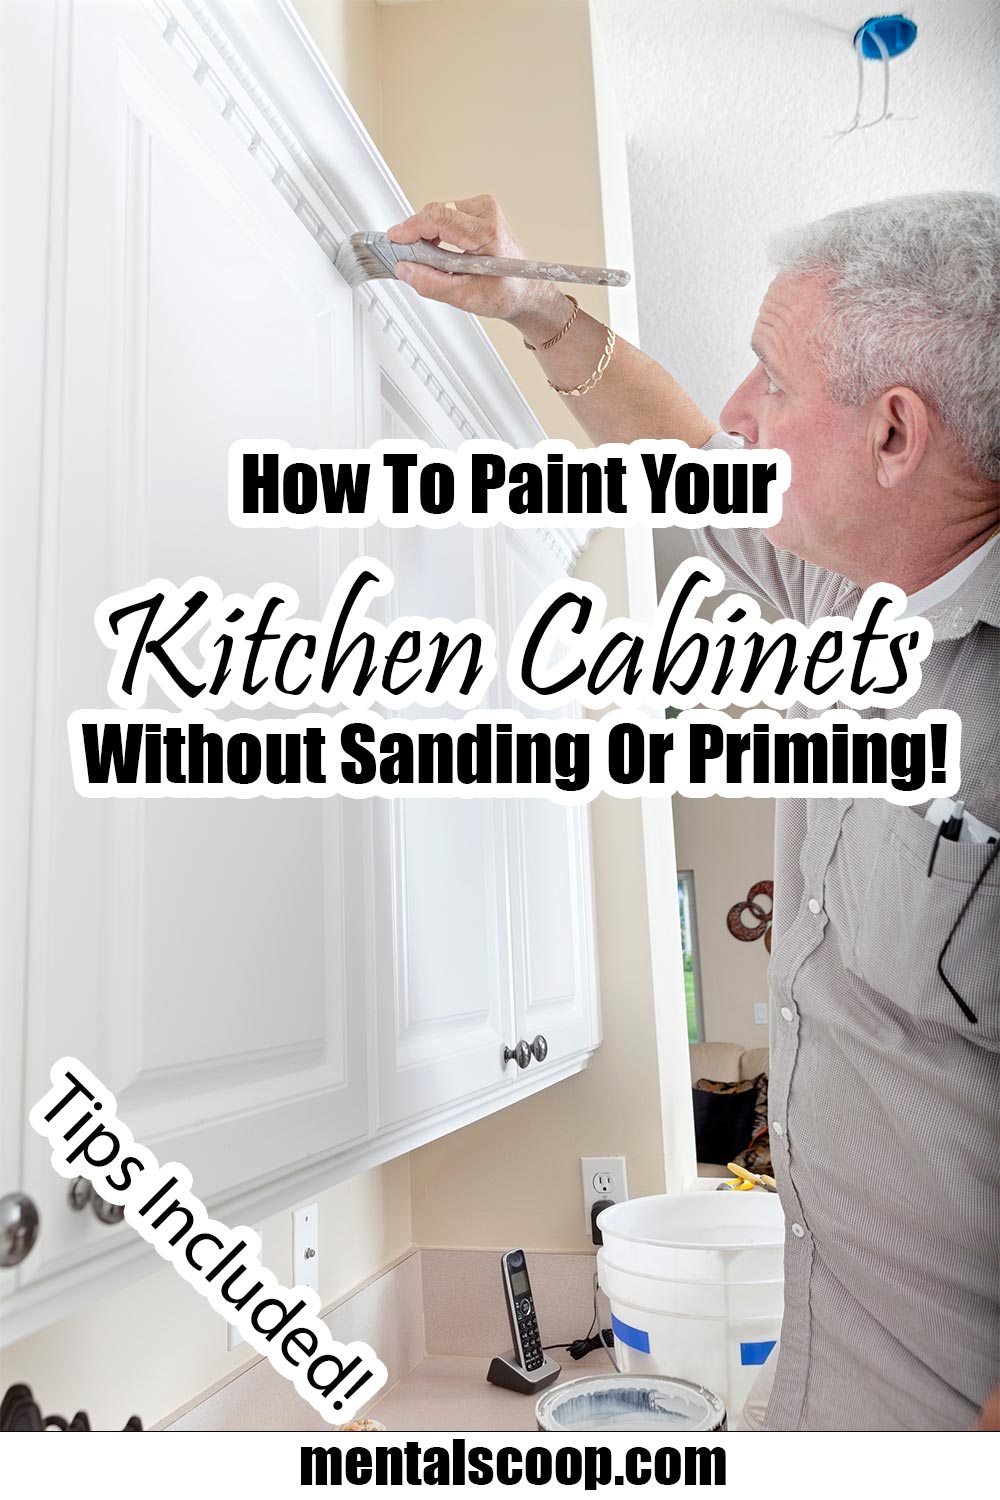 How To Paint Your Kitchen Cabinets Without Sanding Or Priming 